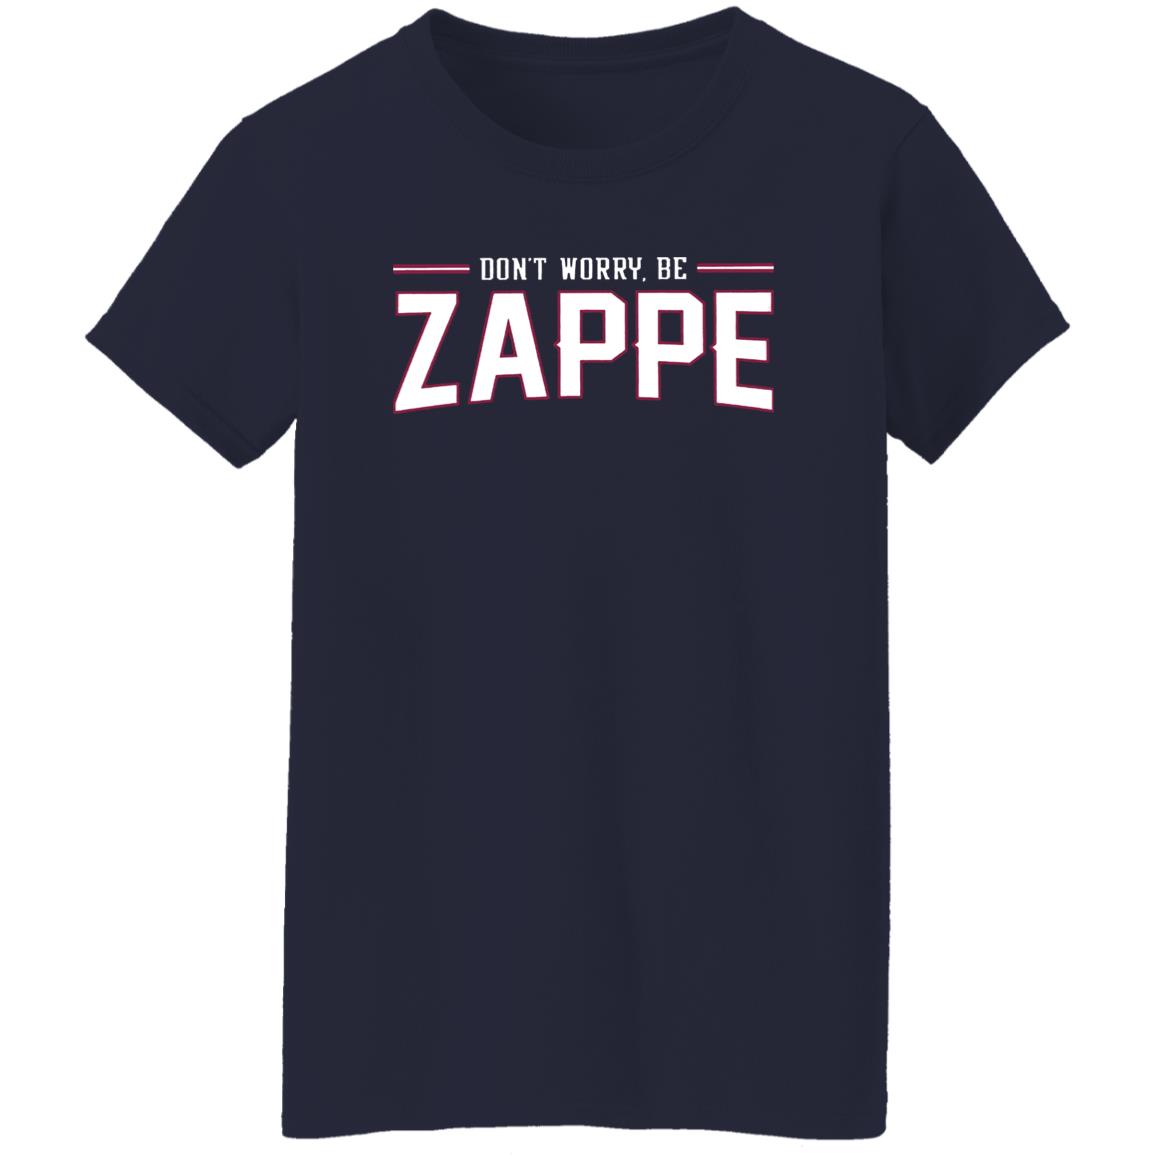 DONT WORRY, BE ZAPPE SHIRT Bailey Zappe, New England Patriots